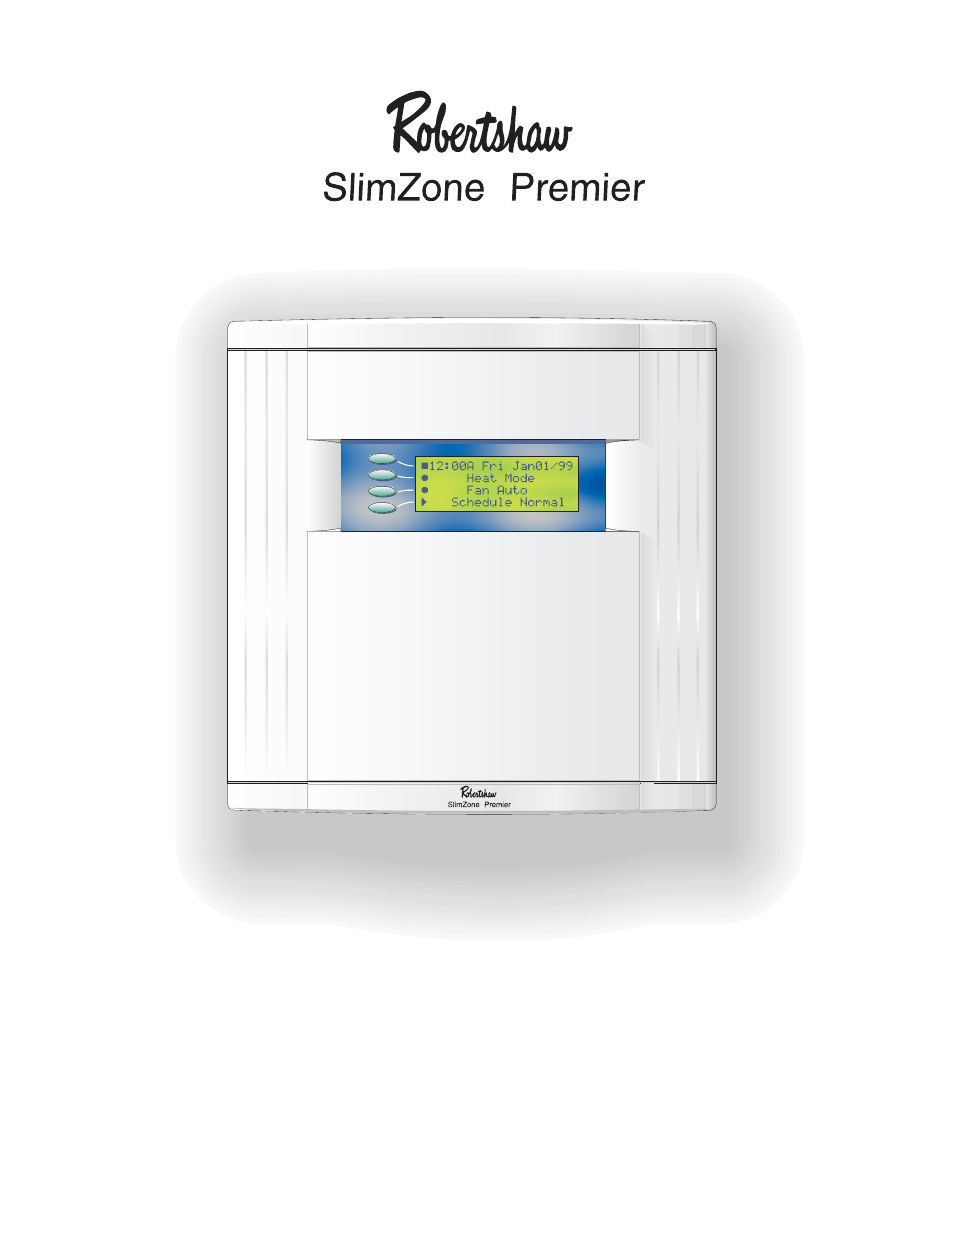 Robertshaw SlimZone PREMIER ZONE CONTROL SYSTEM User Manual | 35 pages